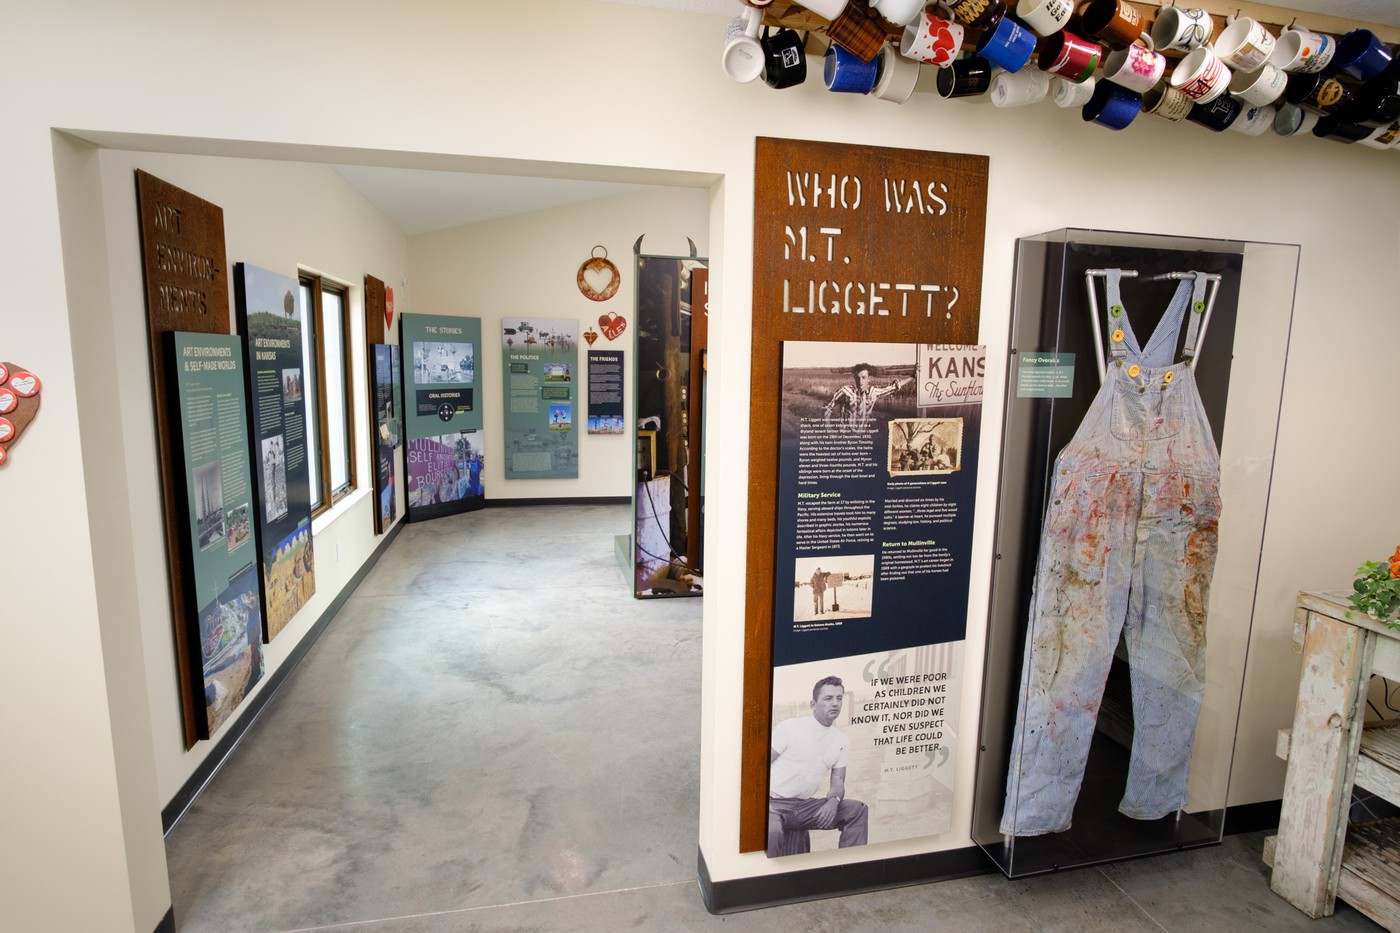 Rusted metal exhibit panel titled 'Who was M.T. Liggett' next to a paint-stained pair of overalls displayed within a case